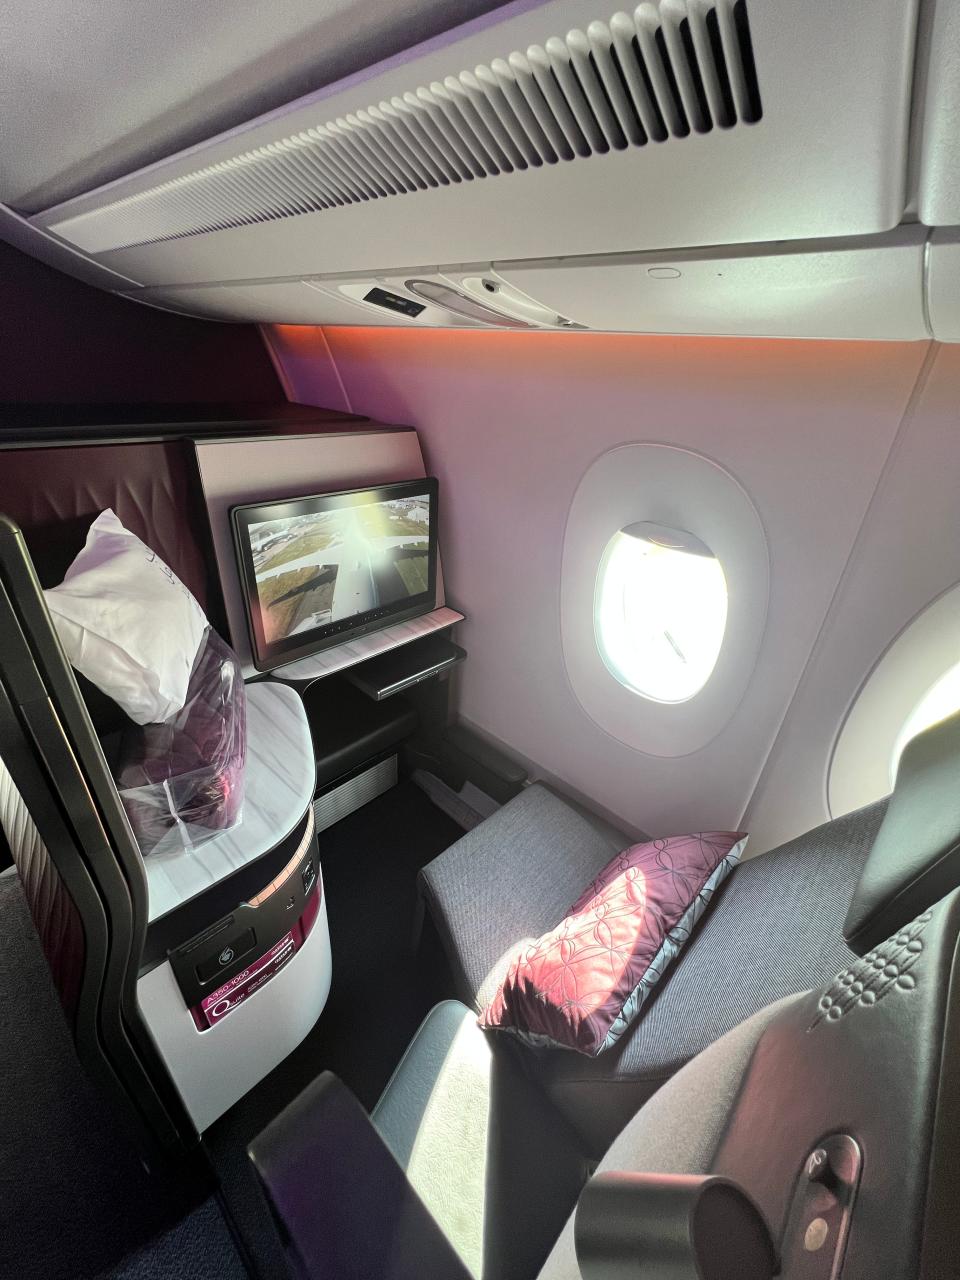 One business class seat on a Qatar Airbus A350, with a burgundy cushion, a window view, and a live feed of the plane on the display screen.